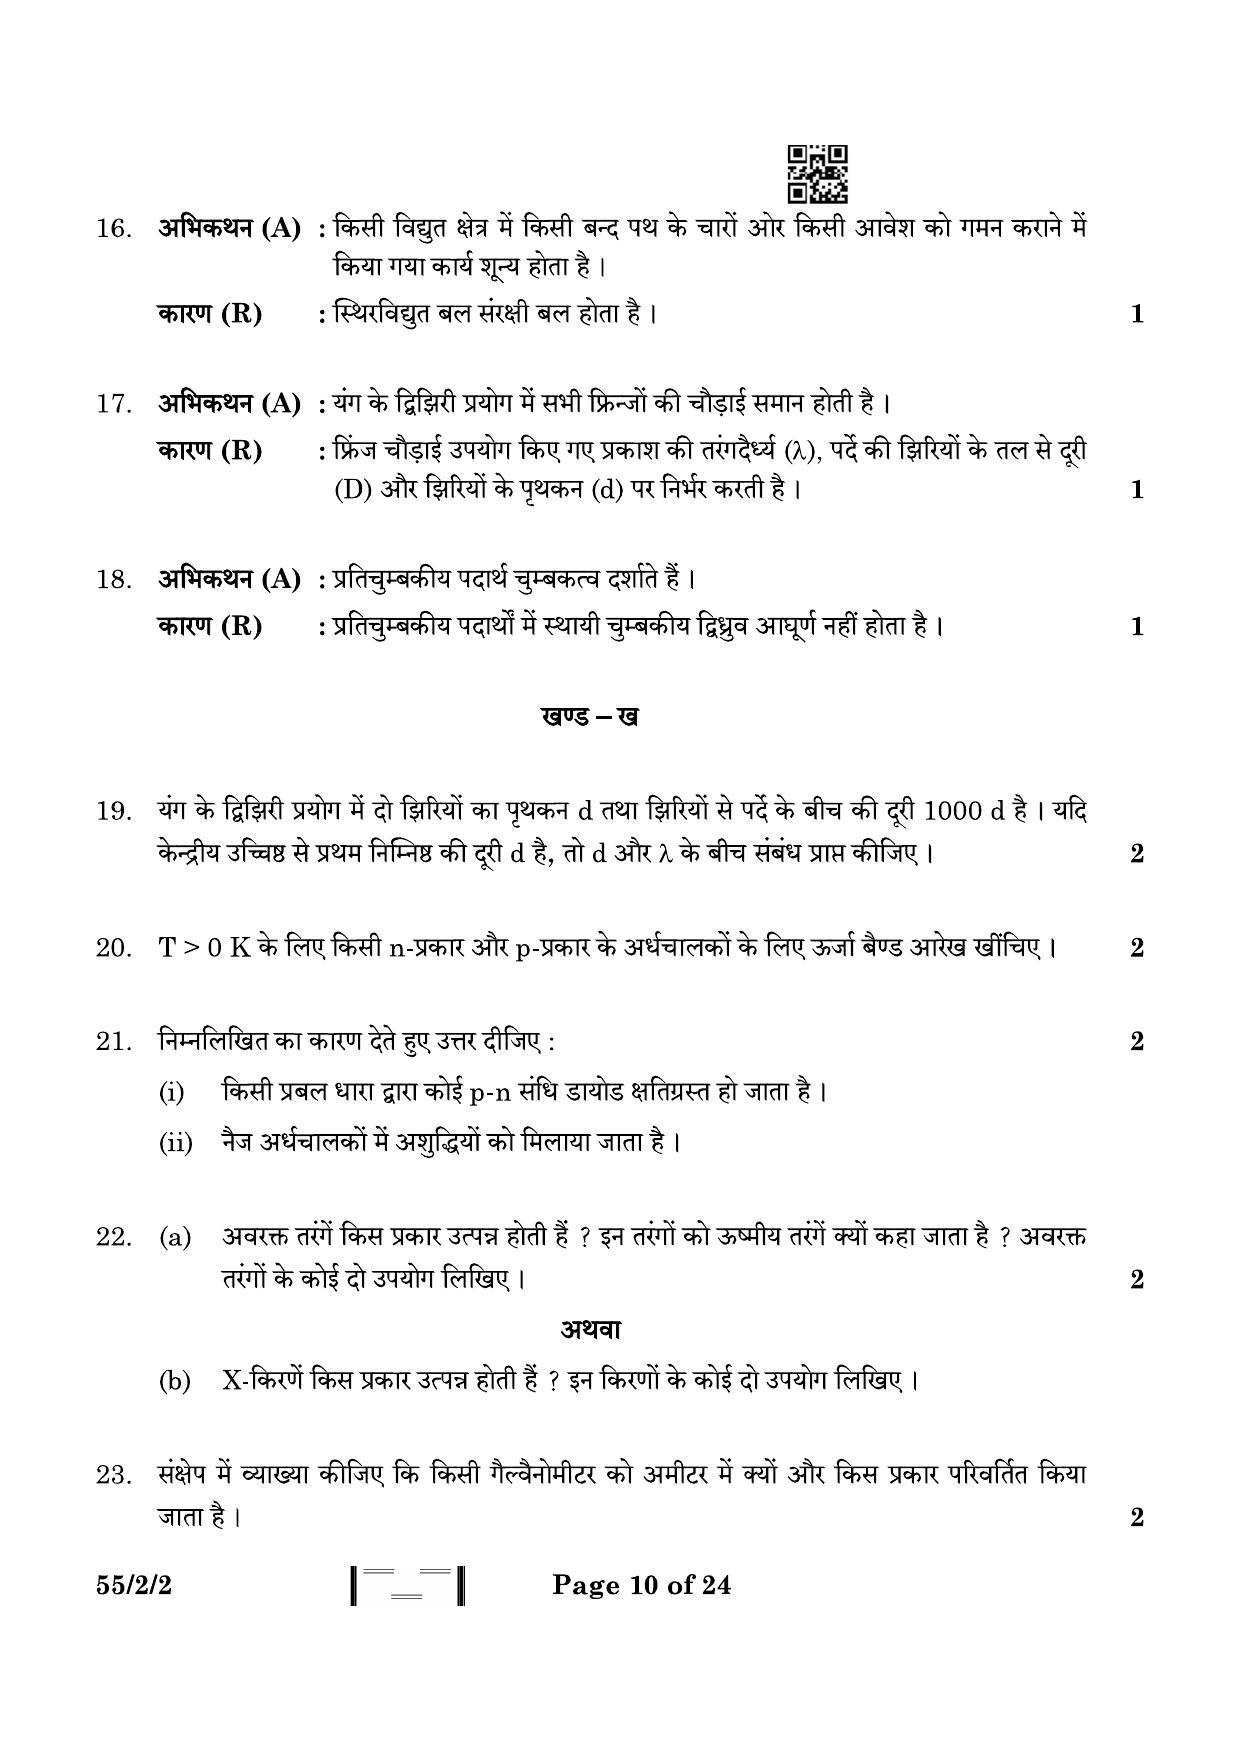 CBSE Class 12 55-2-2 Physics 2023 Question Paper - Page 10